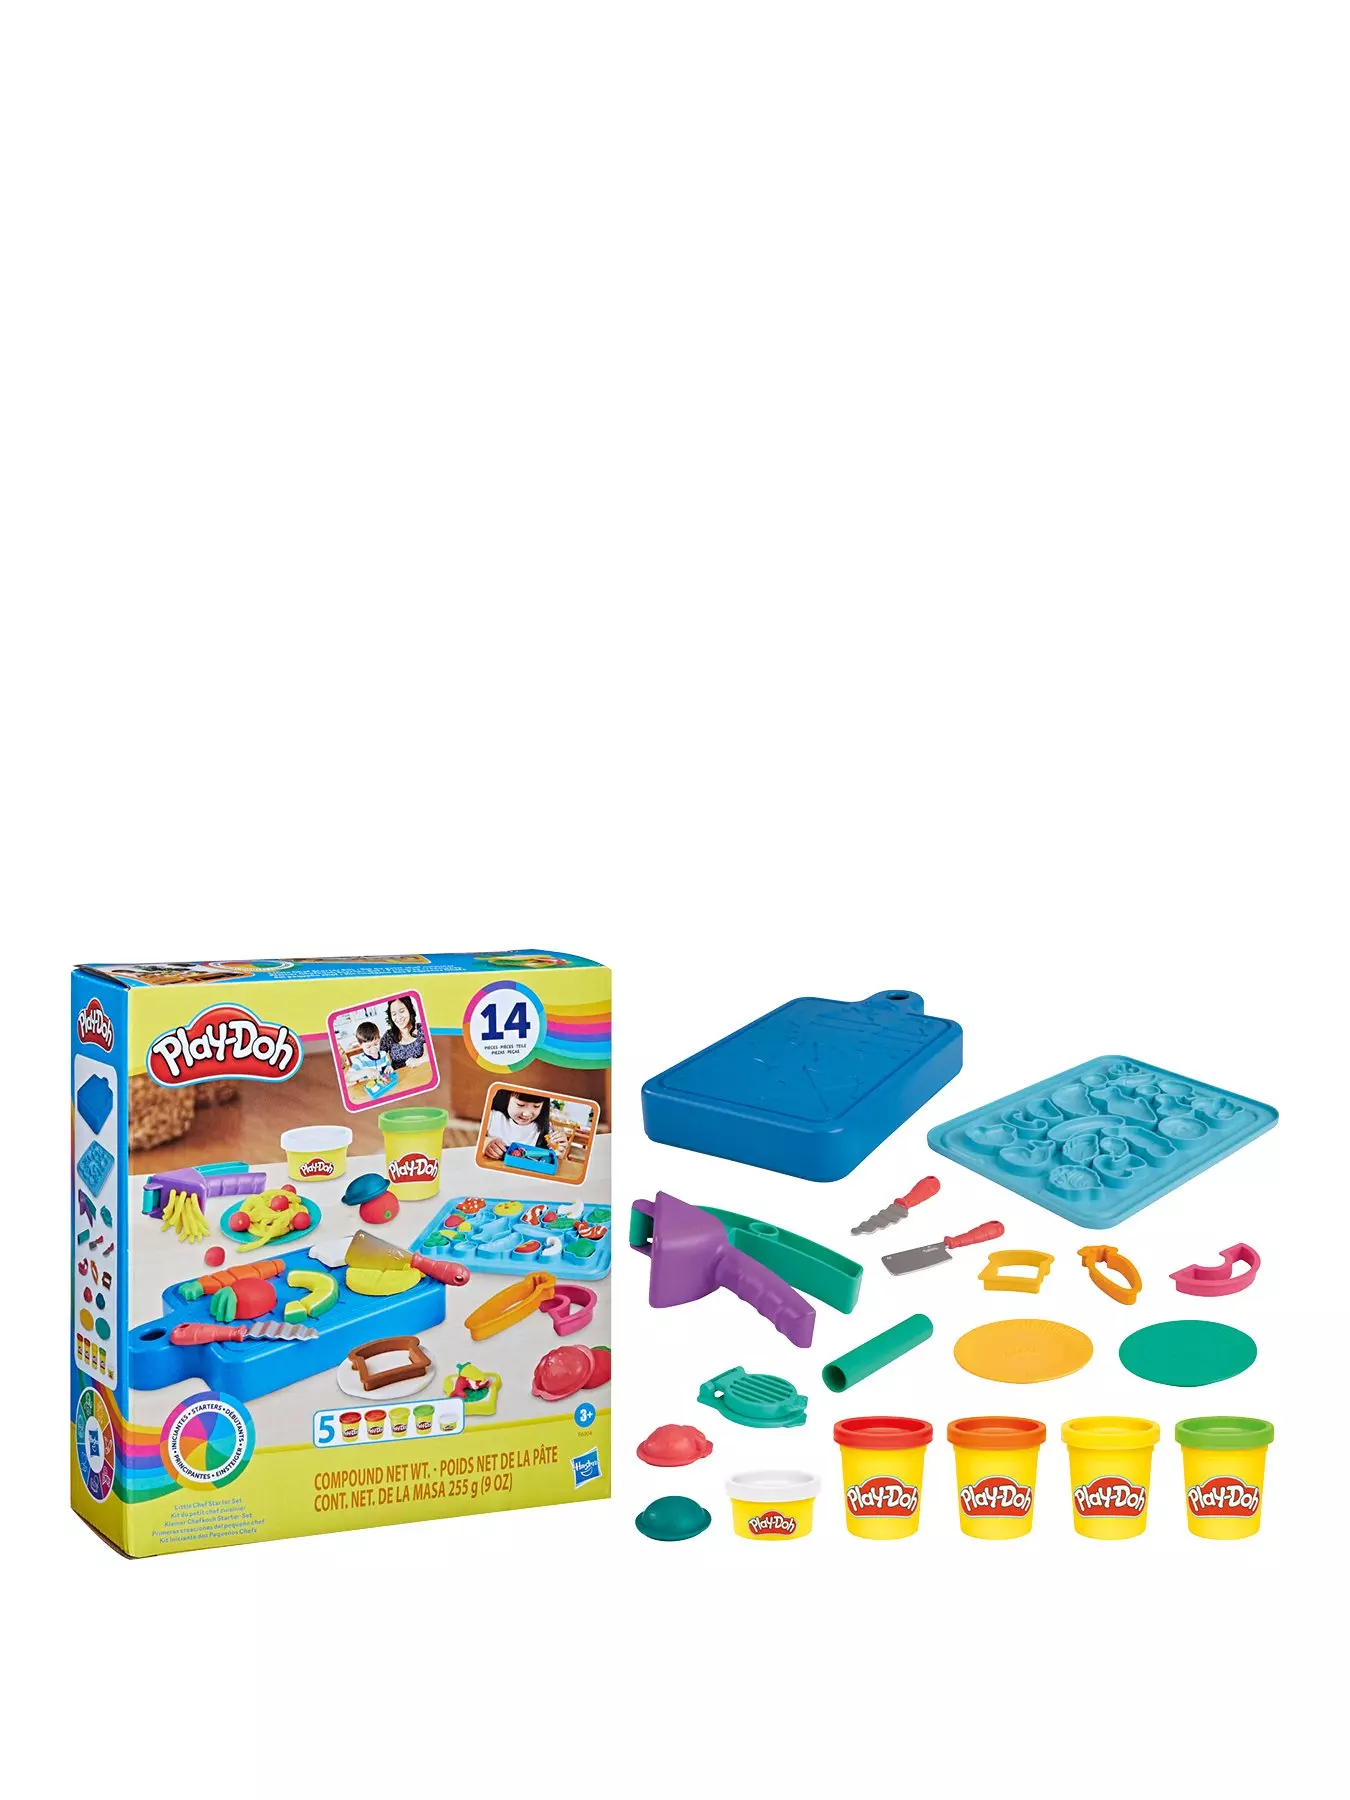 Playdough Tools 55 PCS Play Dough Tools Set for Kids, Play Dough  Accessories Plastic Playdough Alphabet Numbers Shapes Cutters,Playdough  Rollers,Dough